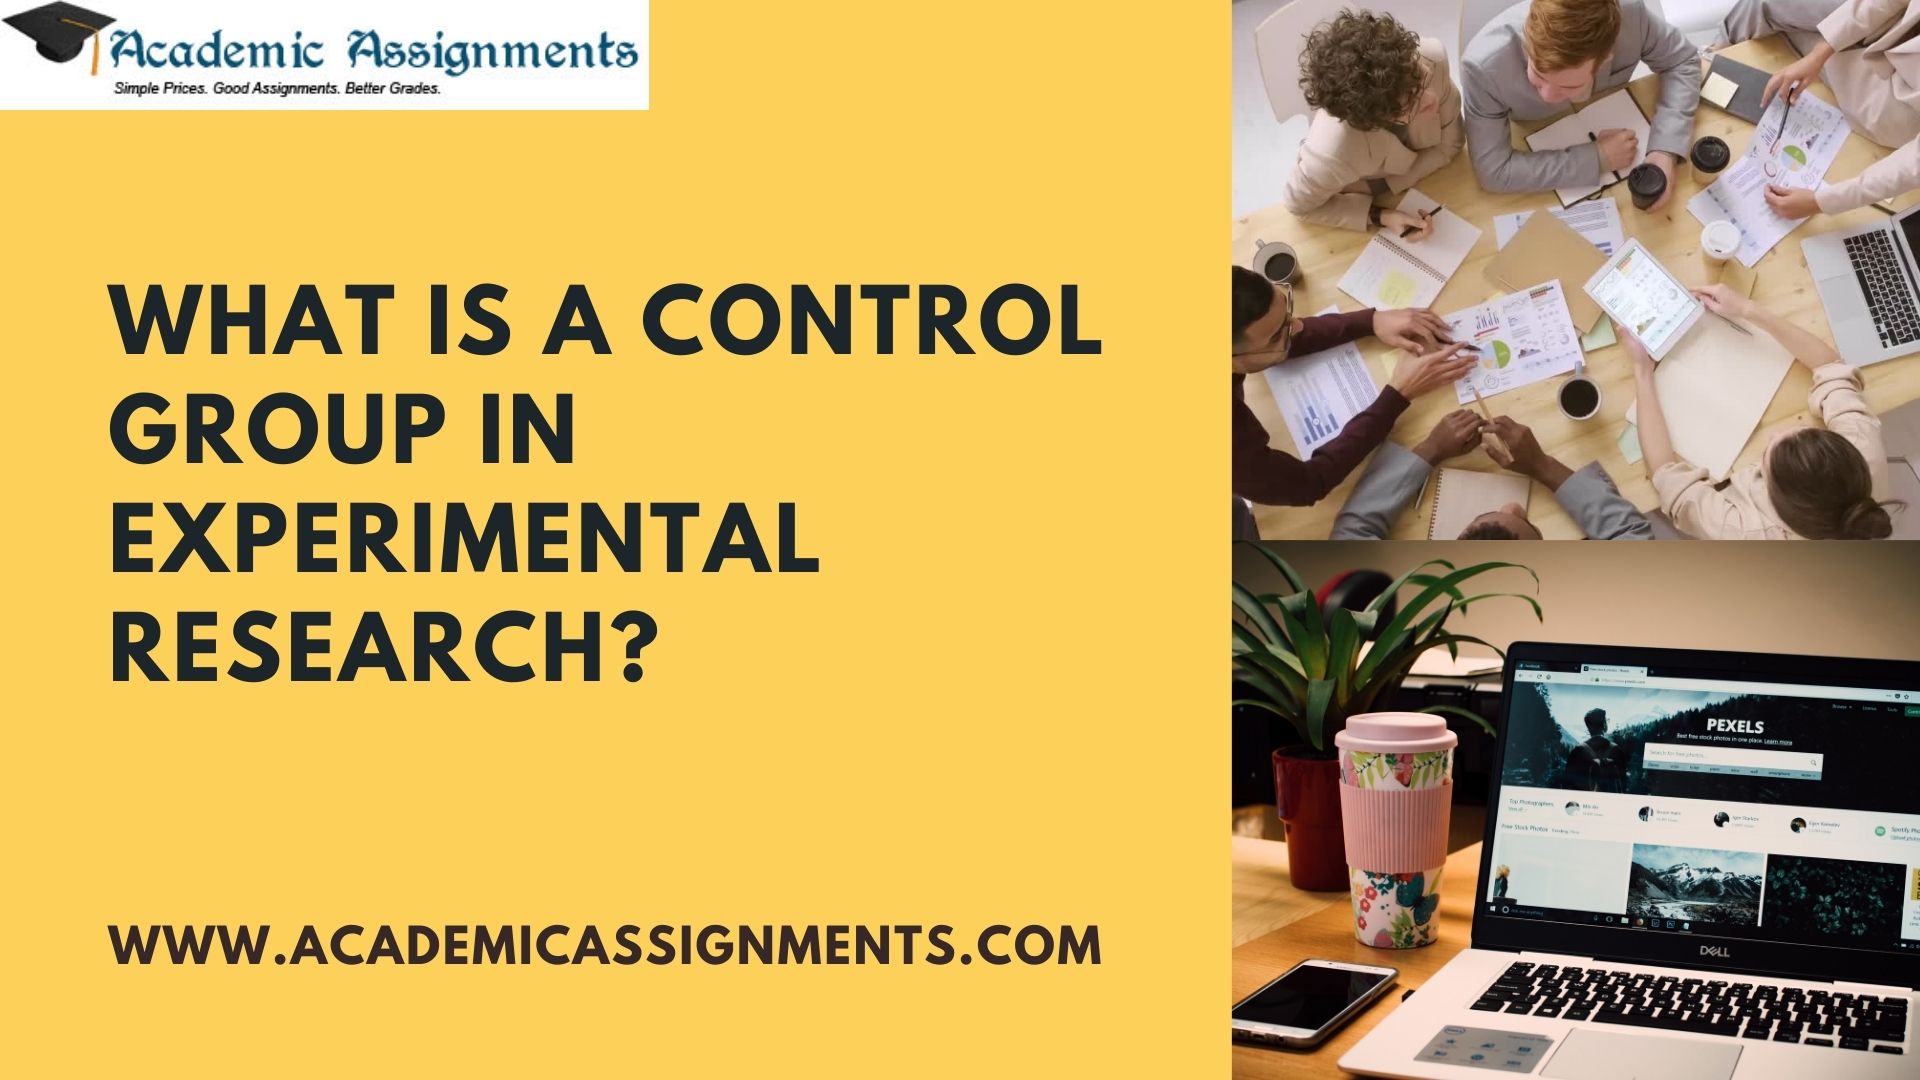 What is a Control Group in Experimental Research